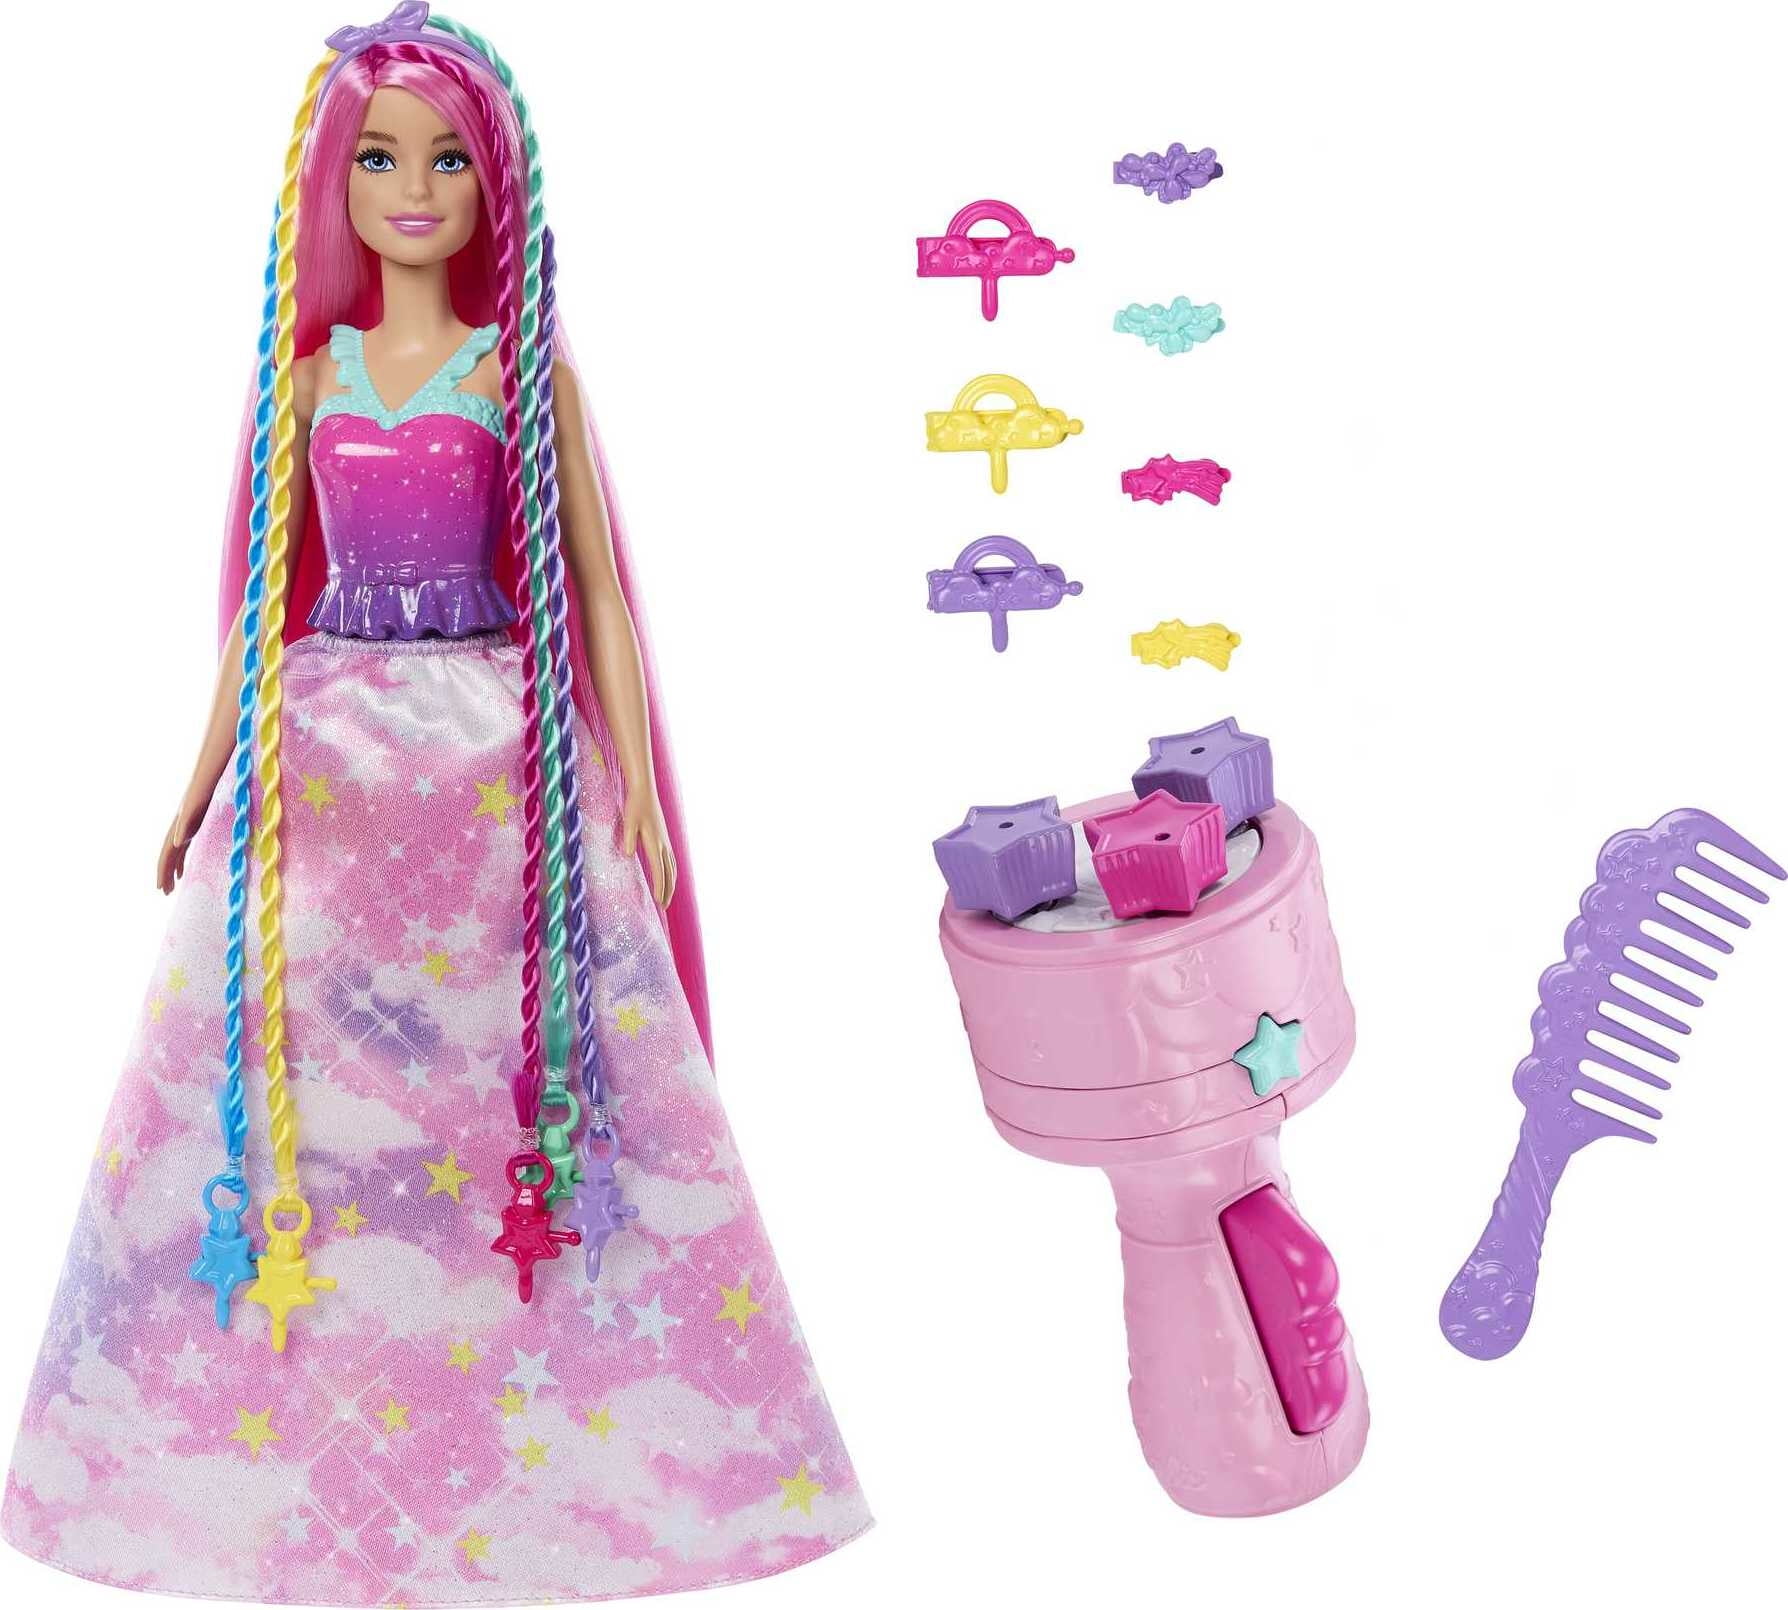 Barbie Dreamtopia Twist 'n Style Doll with Pink Hair, Styling Tool and  Accessories